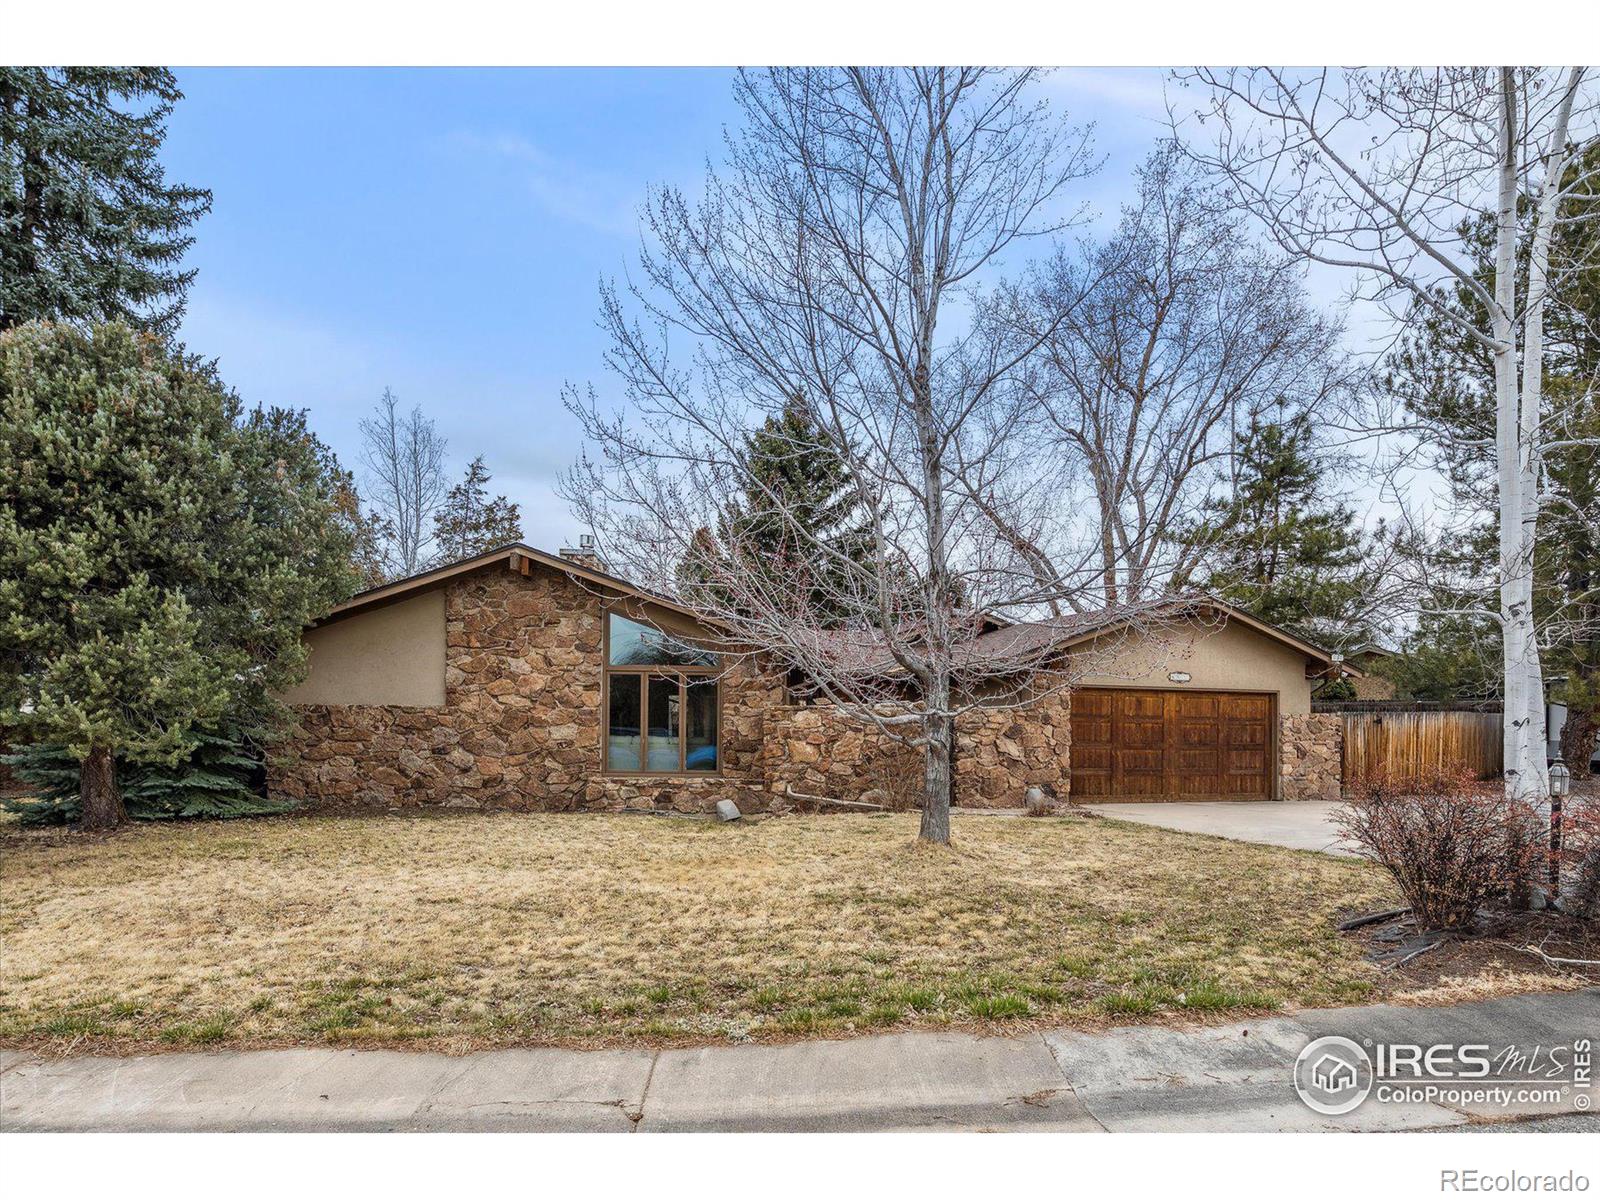 4577  tanglewood trail, Boulder sold home. Closed on 2024-04-25 for $1,030,000.